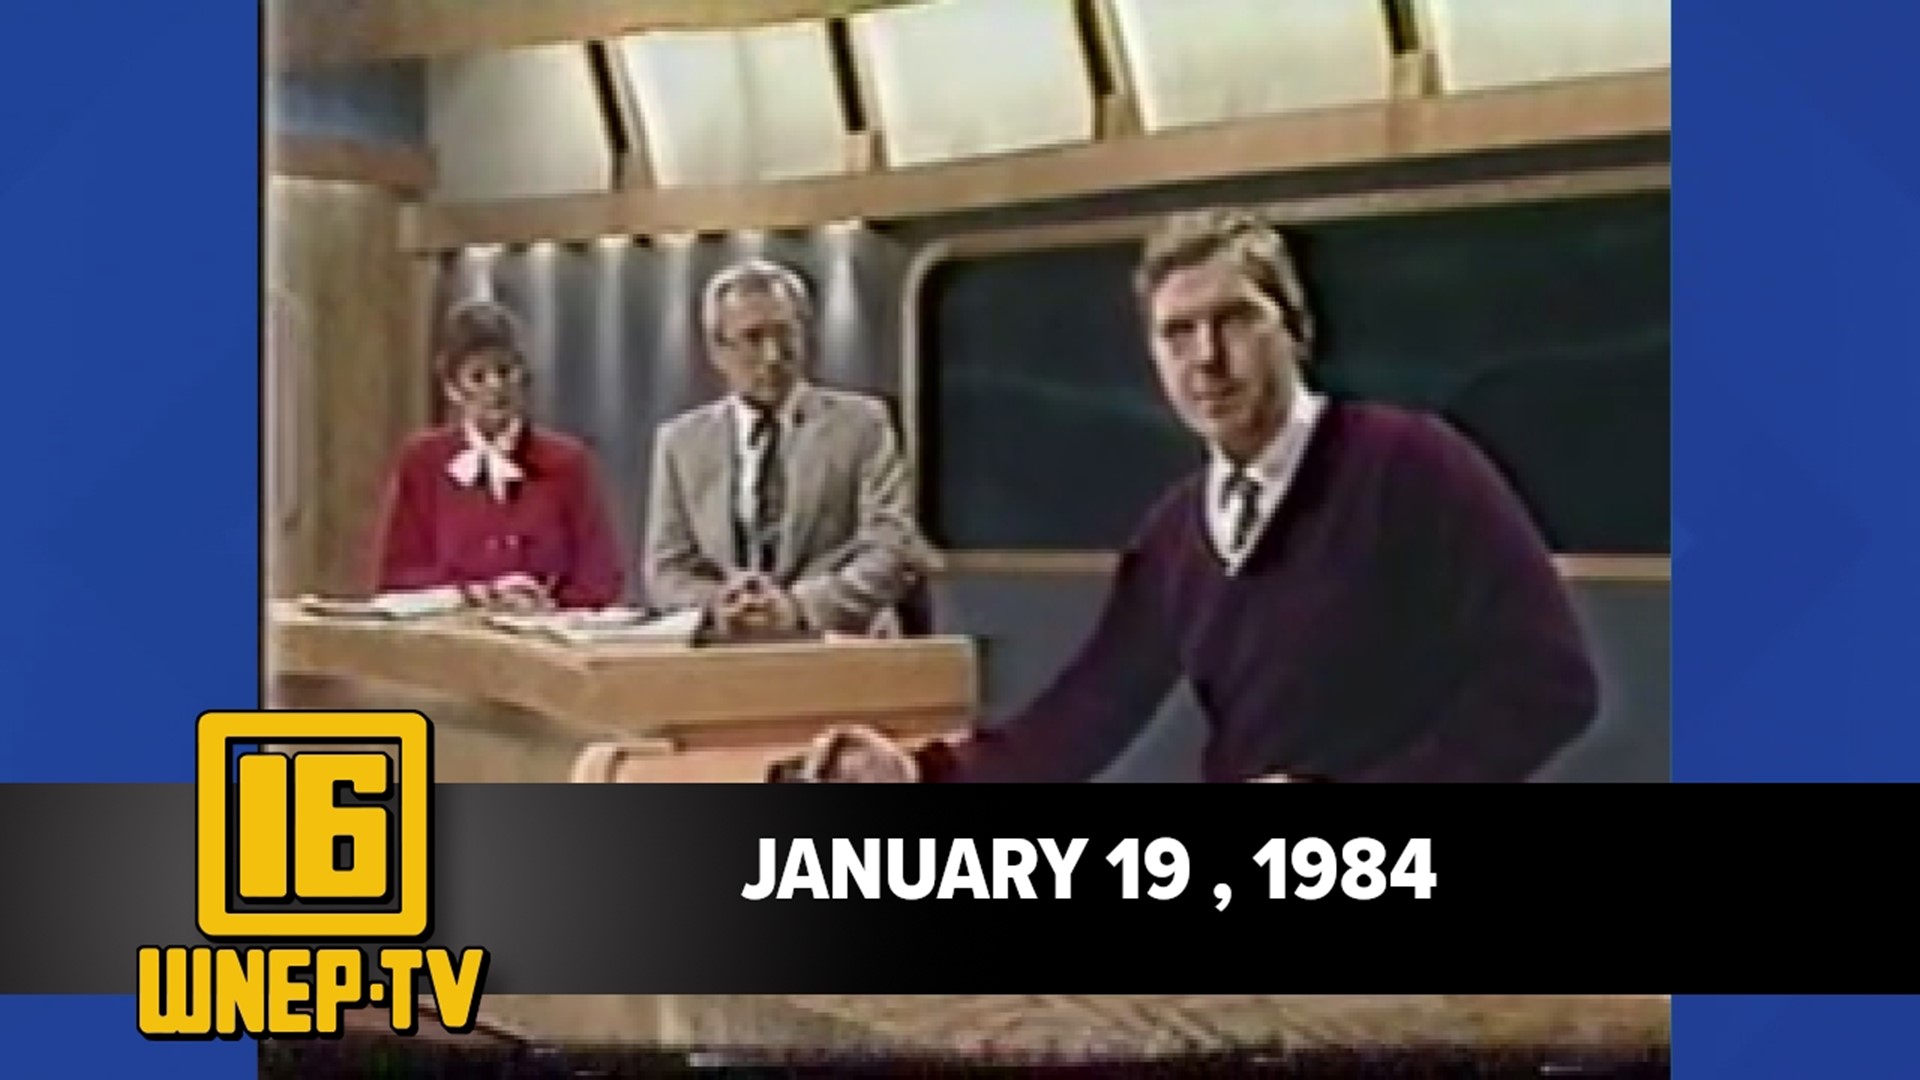 Join Karen Harch and Nolan Johannes for curated stories from January 19, 1984.